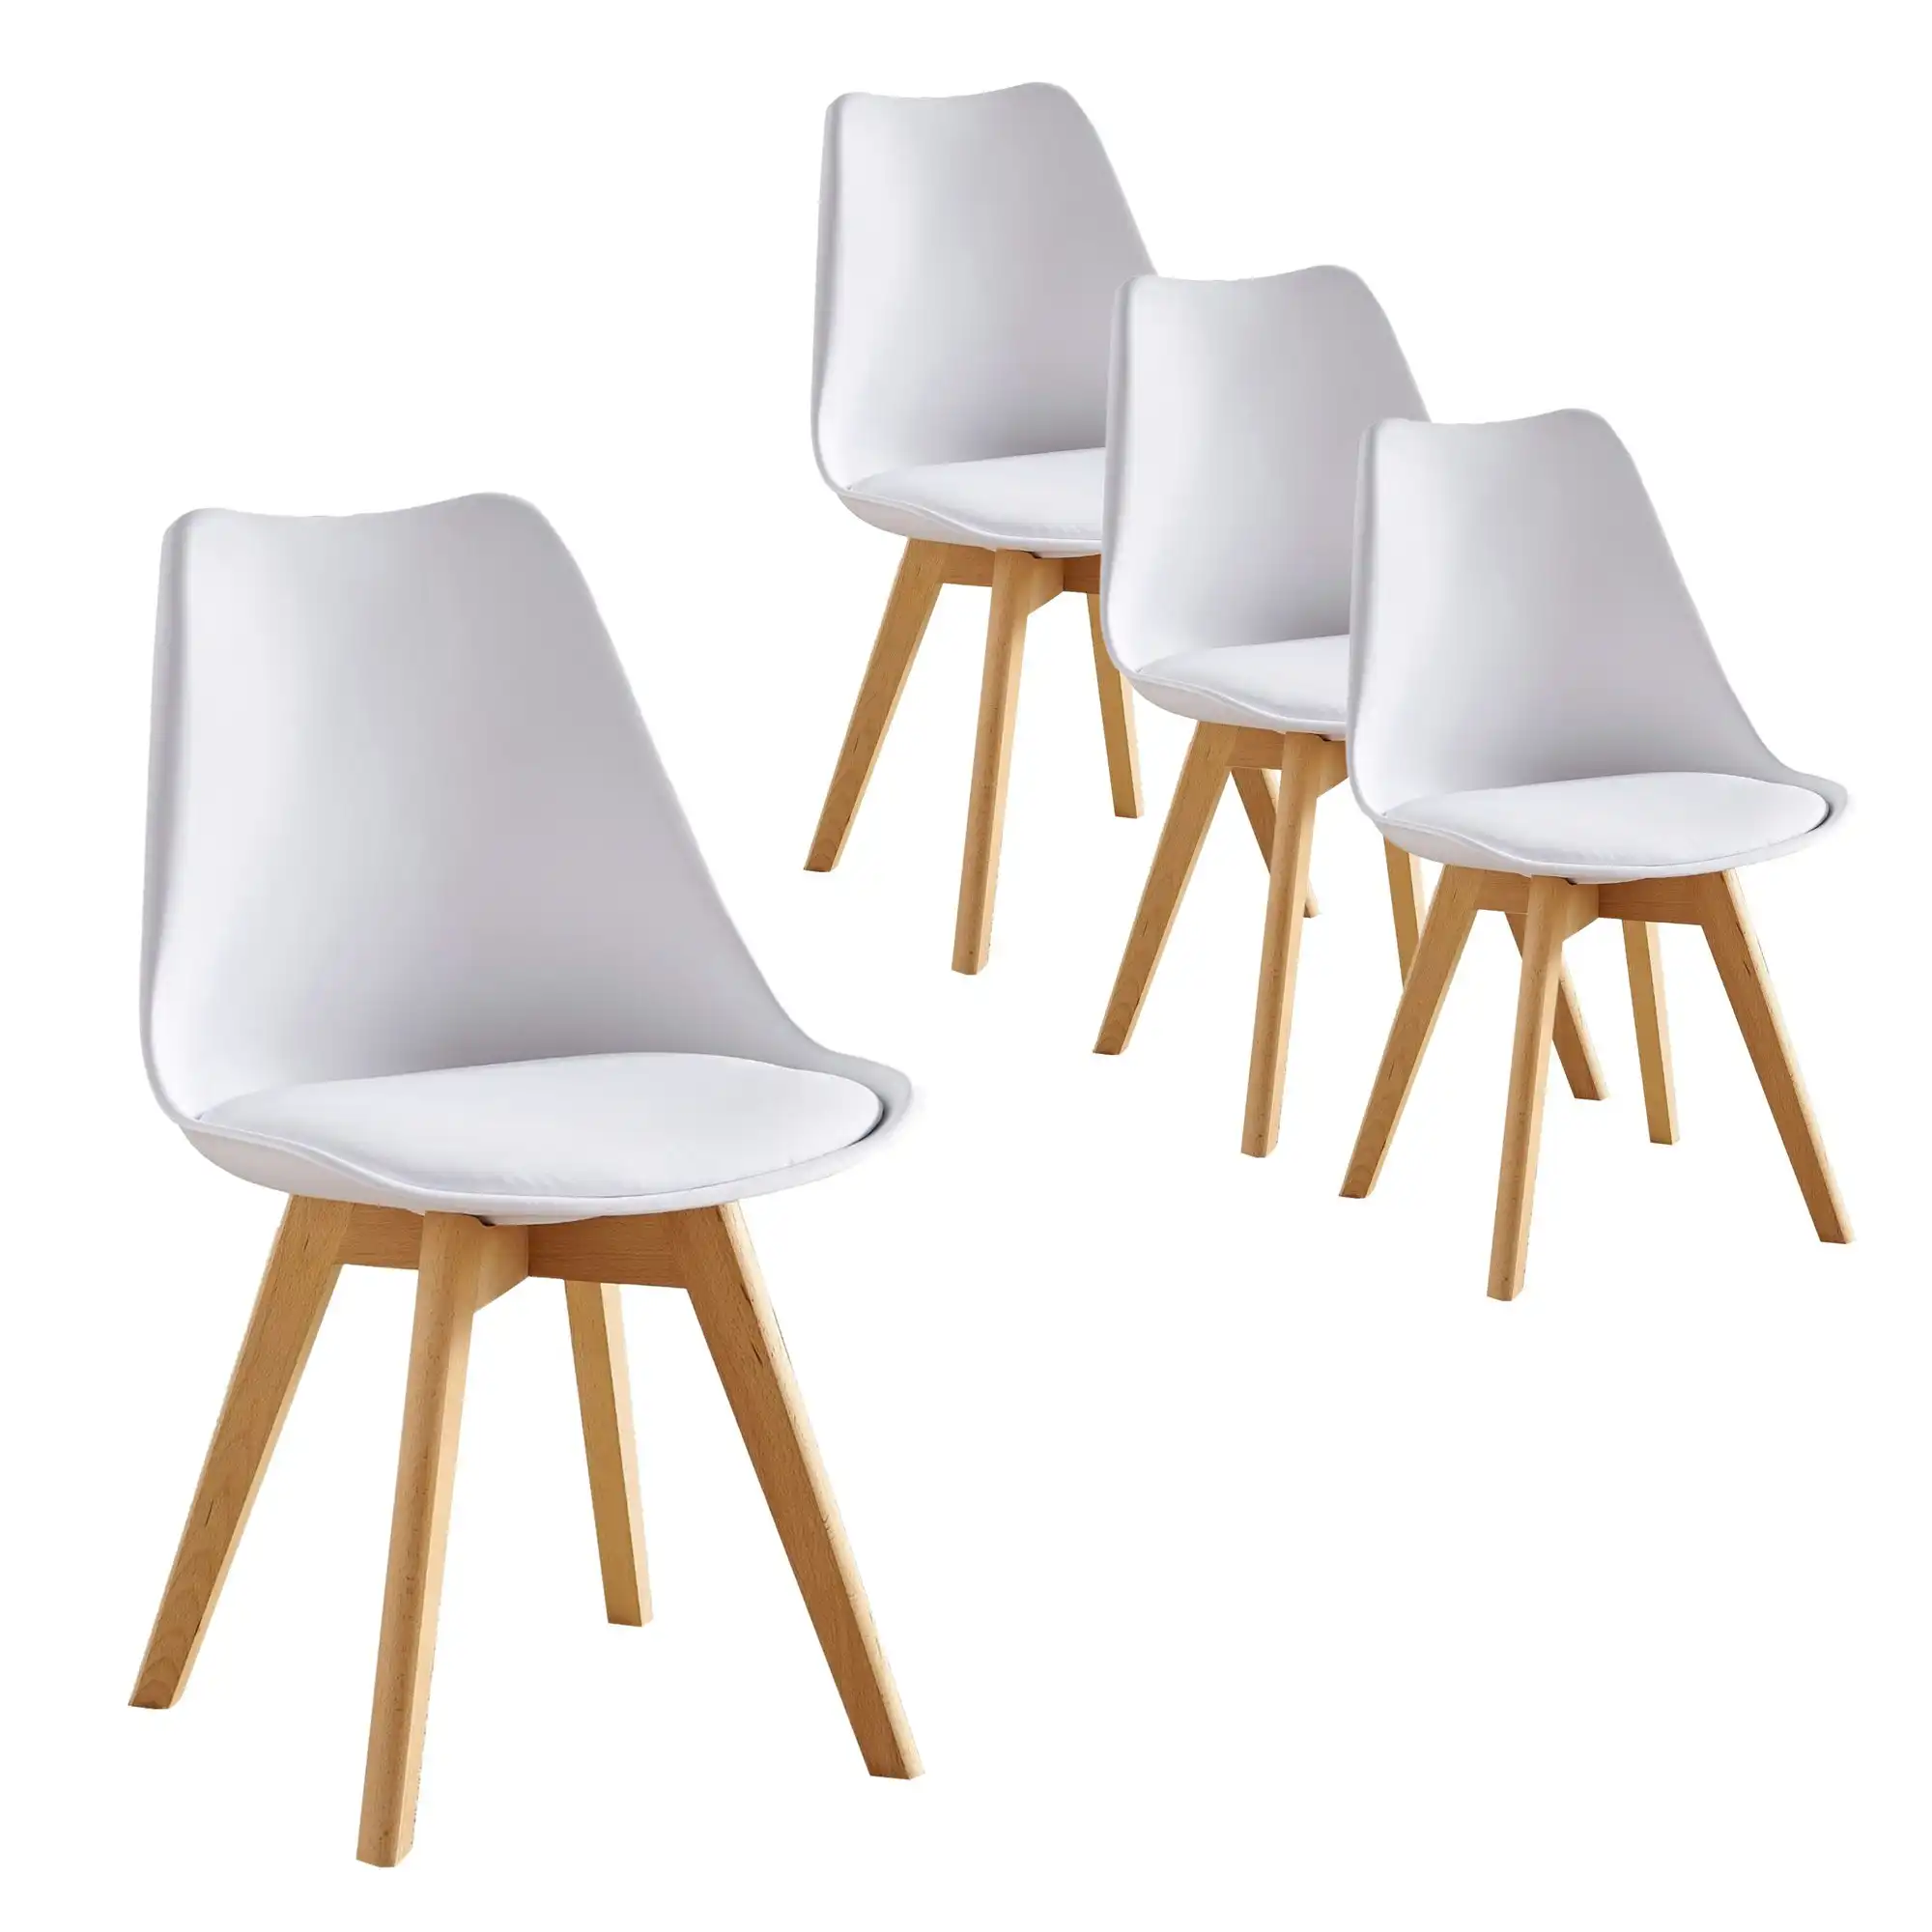 Padded Oliver Replica Dining Chair -White Set of 4